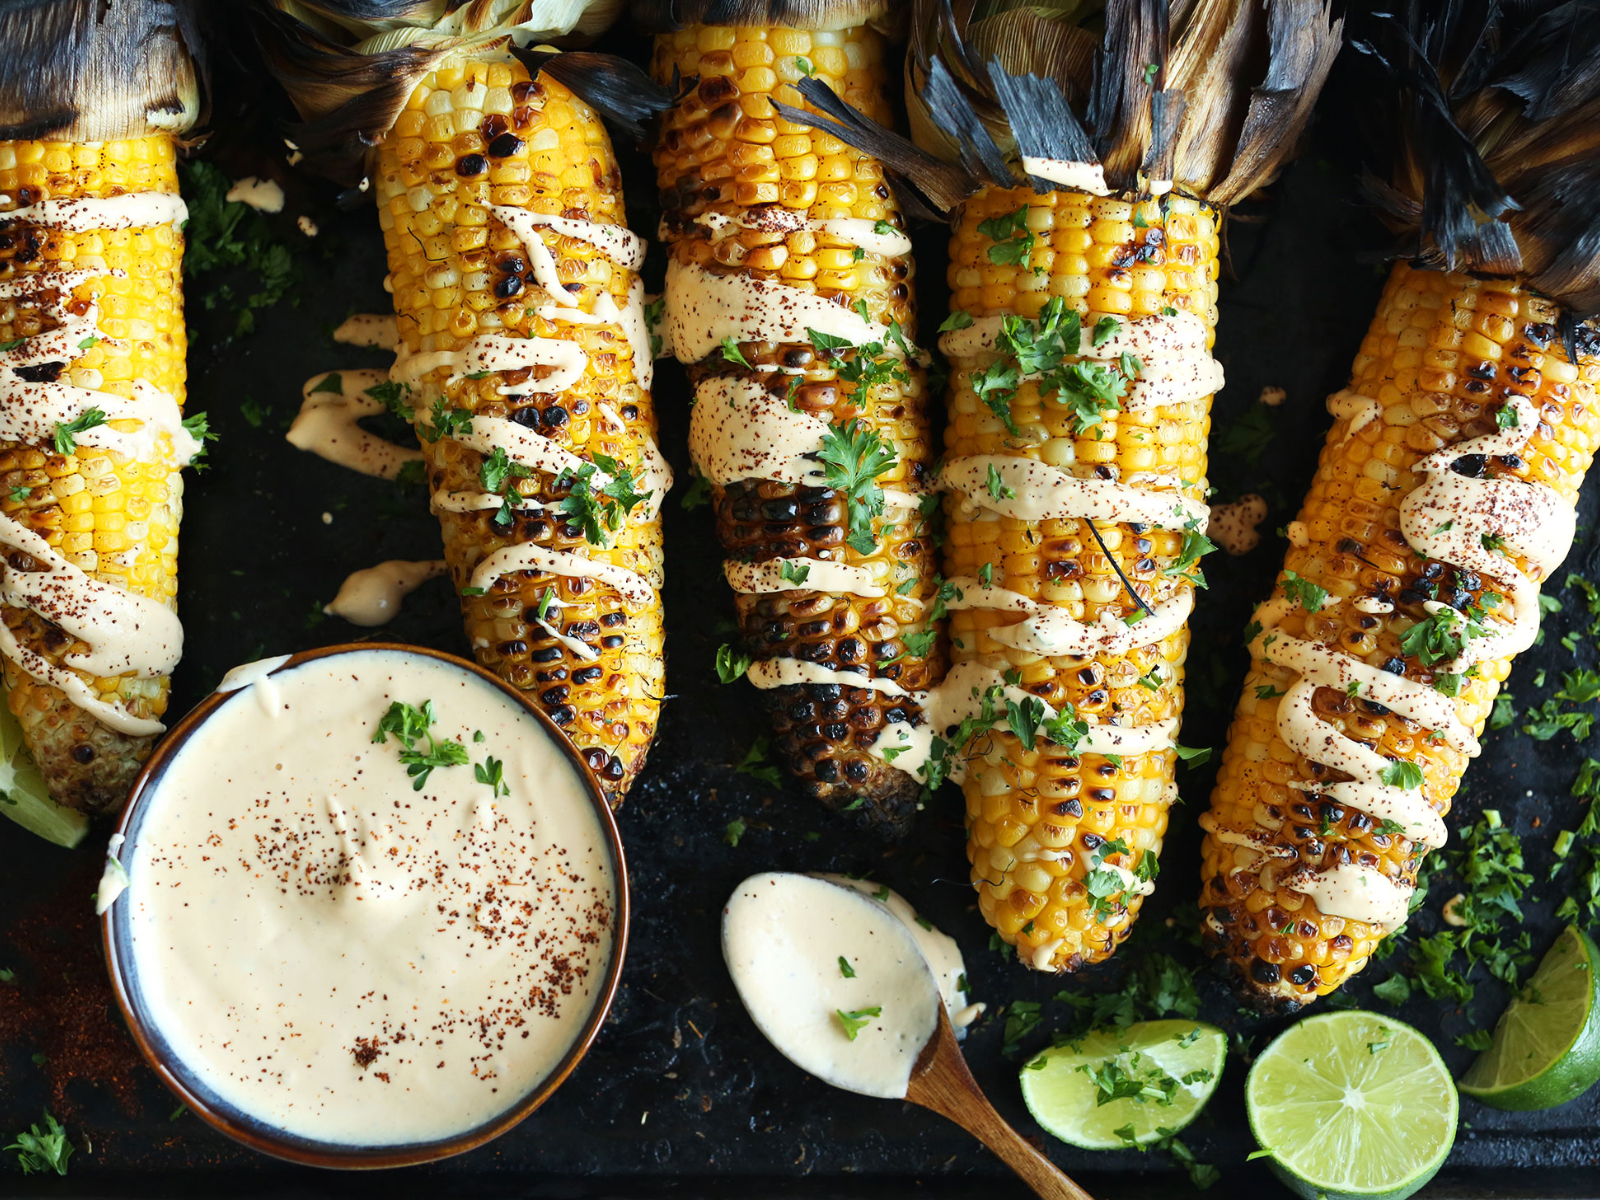 Grilled corn with sriracha aioli drizzled on top